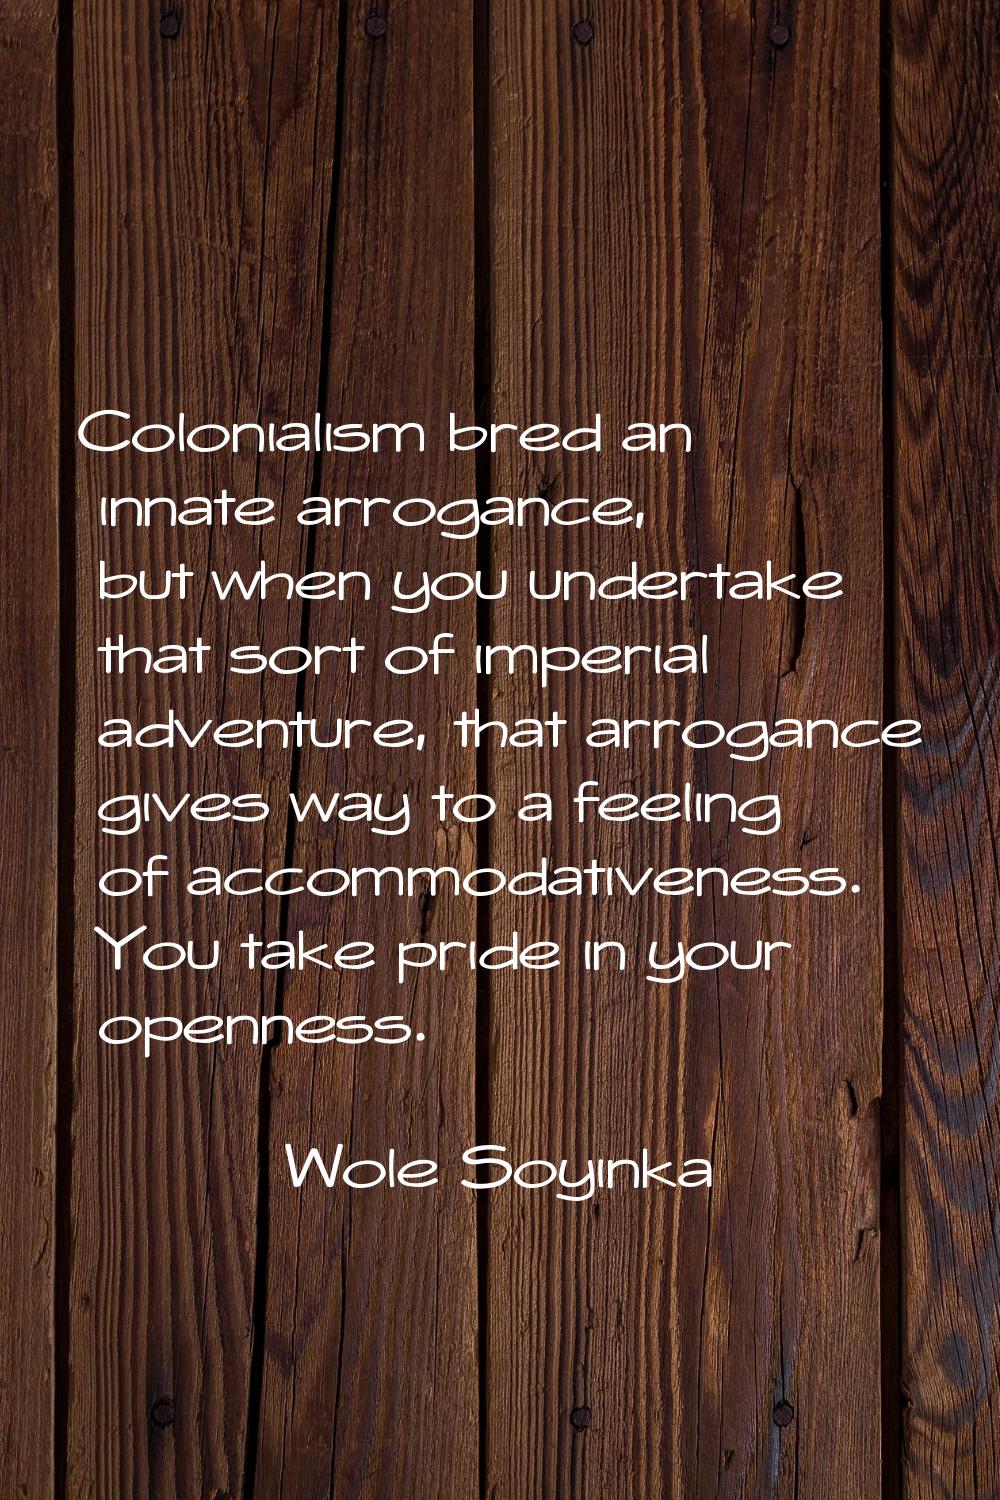 Colonialism bred an innate arrogance, but when you undertake that sort of imperial adventure, that 